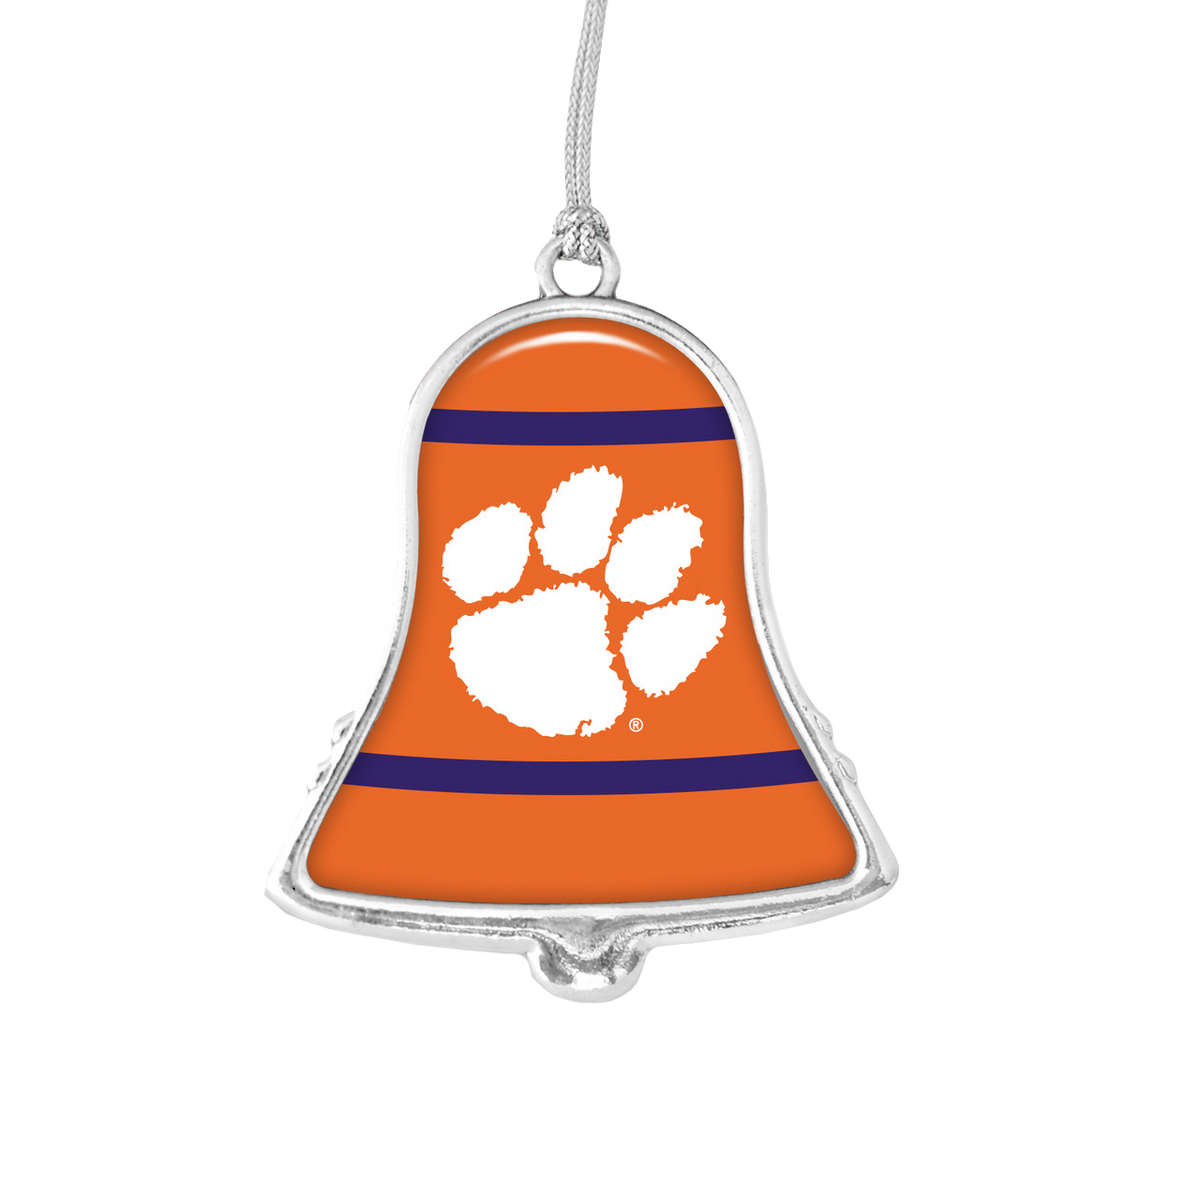 Clemson Bell Ornament with Stripes